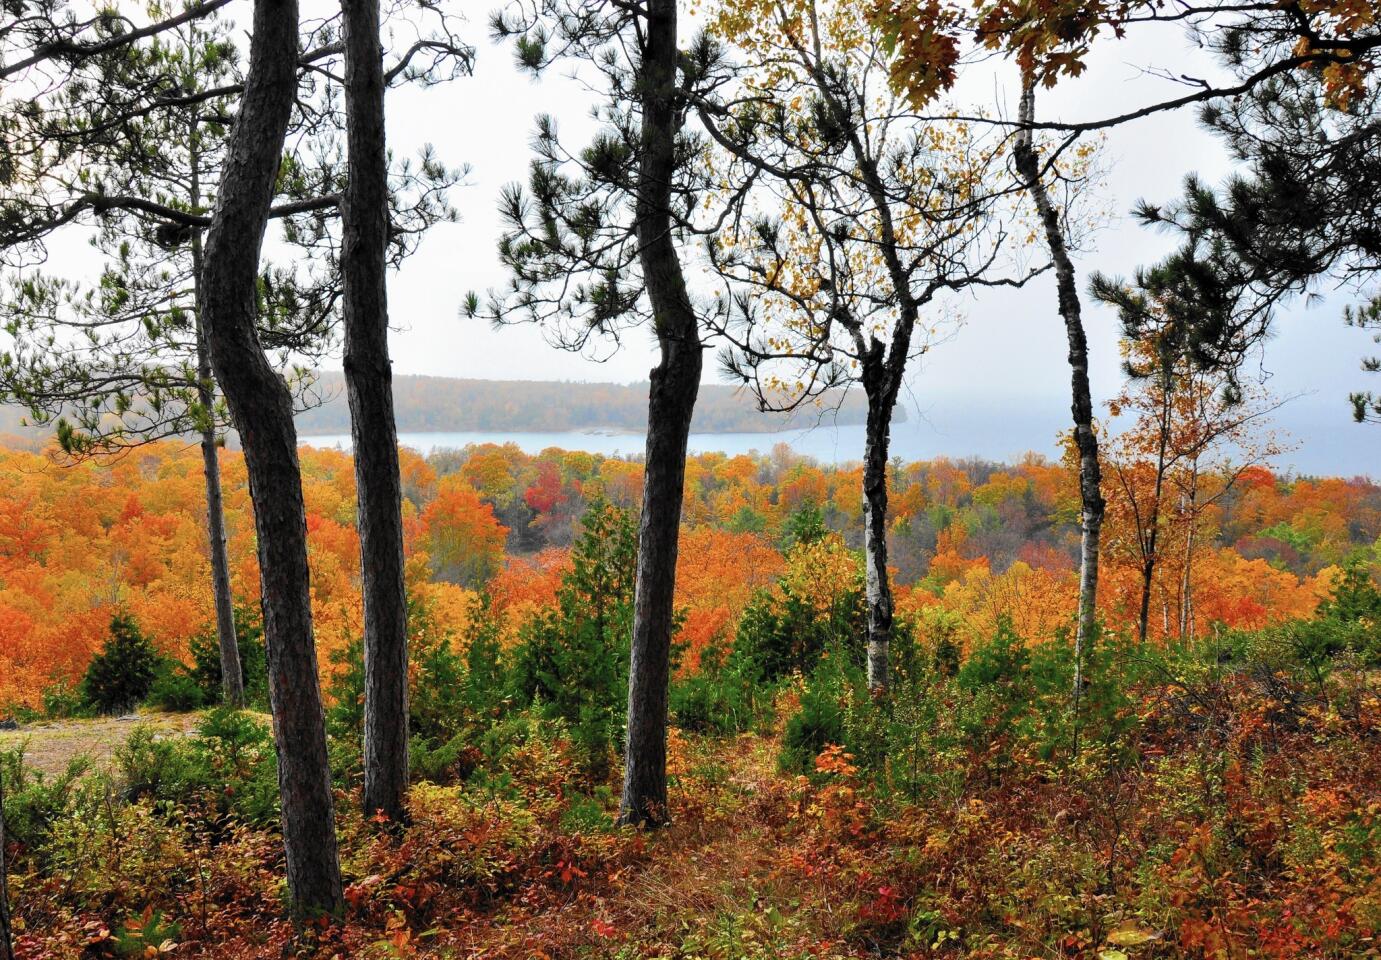 Visitors taking a scenic drive through Peninsula State Park in Door County, Wis., often stop at Sven’s Bluff to admire the view.